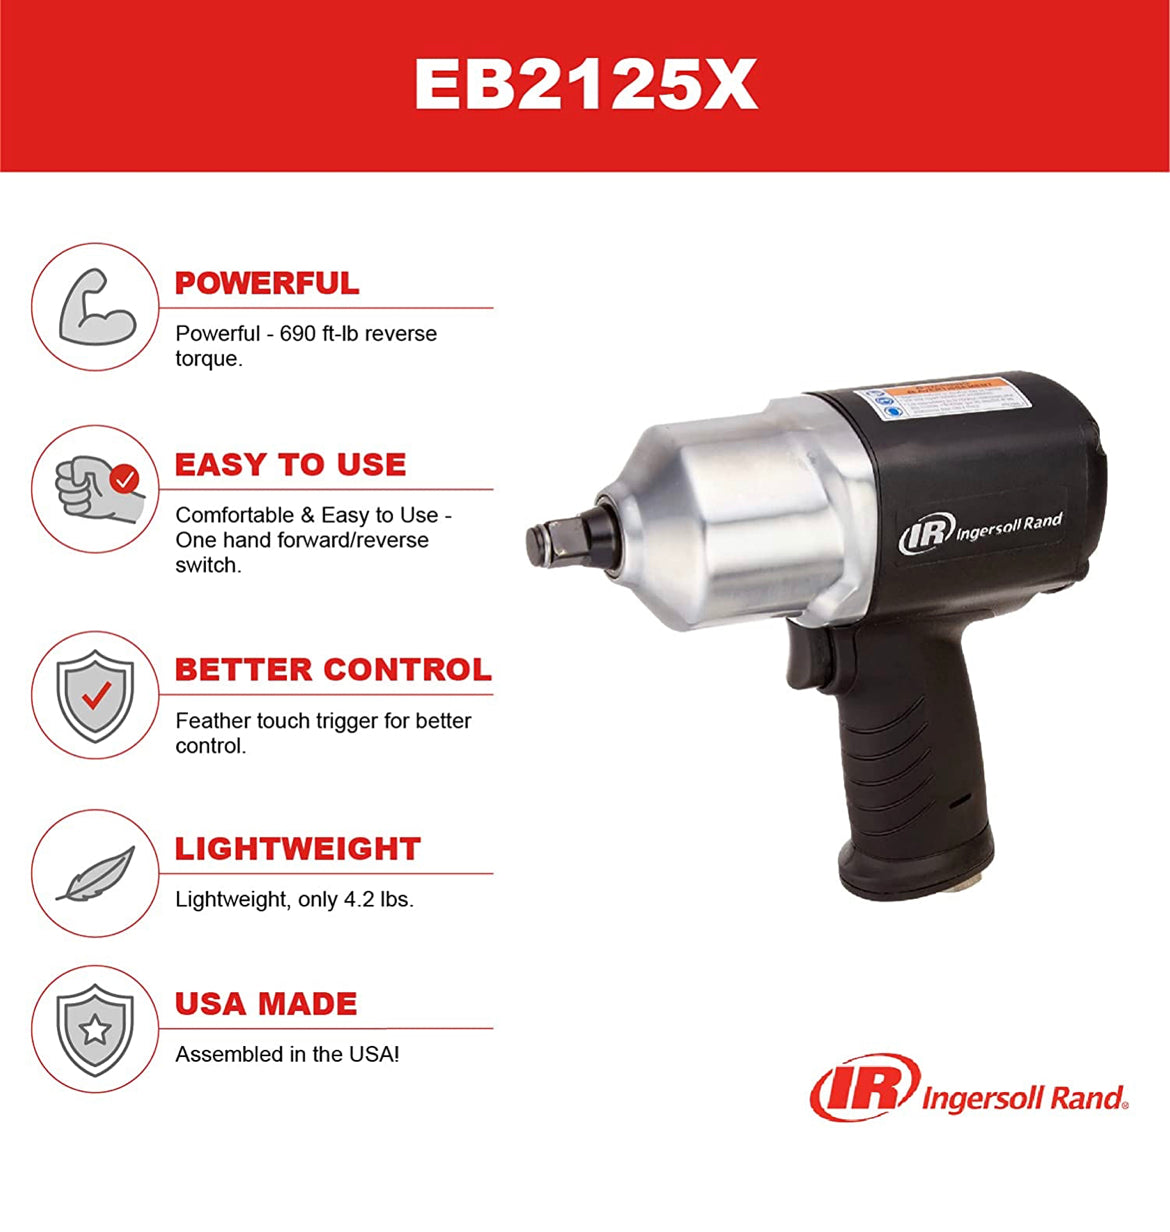 Impact Driver Ingersoll Rand Edge Series 1/2" Composite Air Impact Wrench